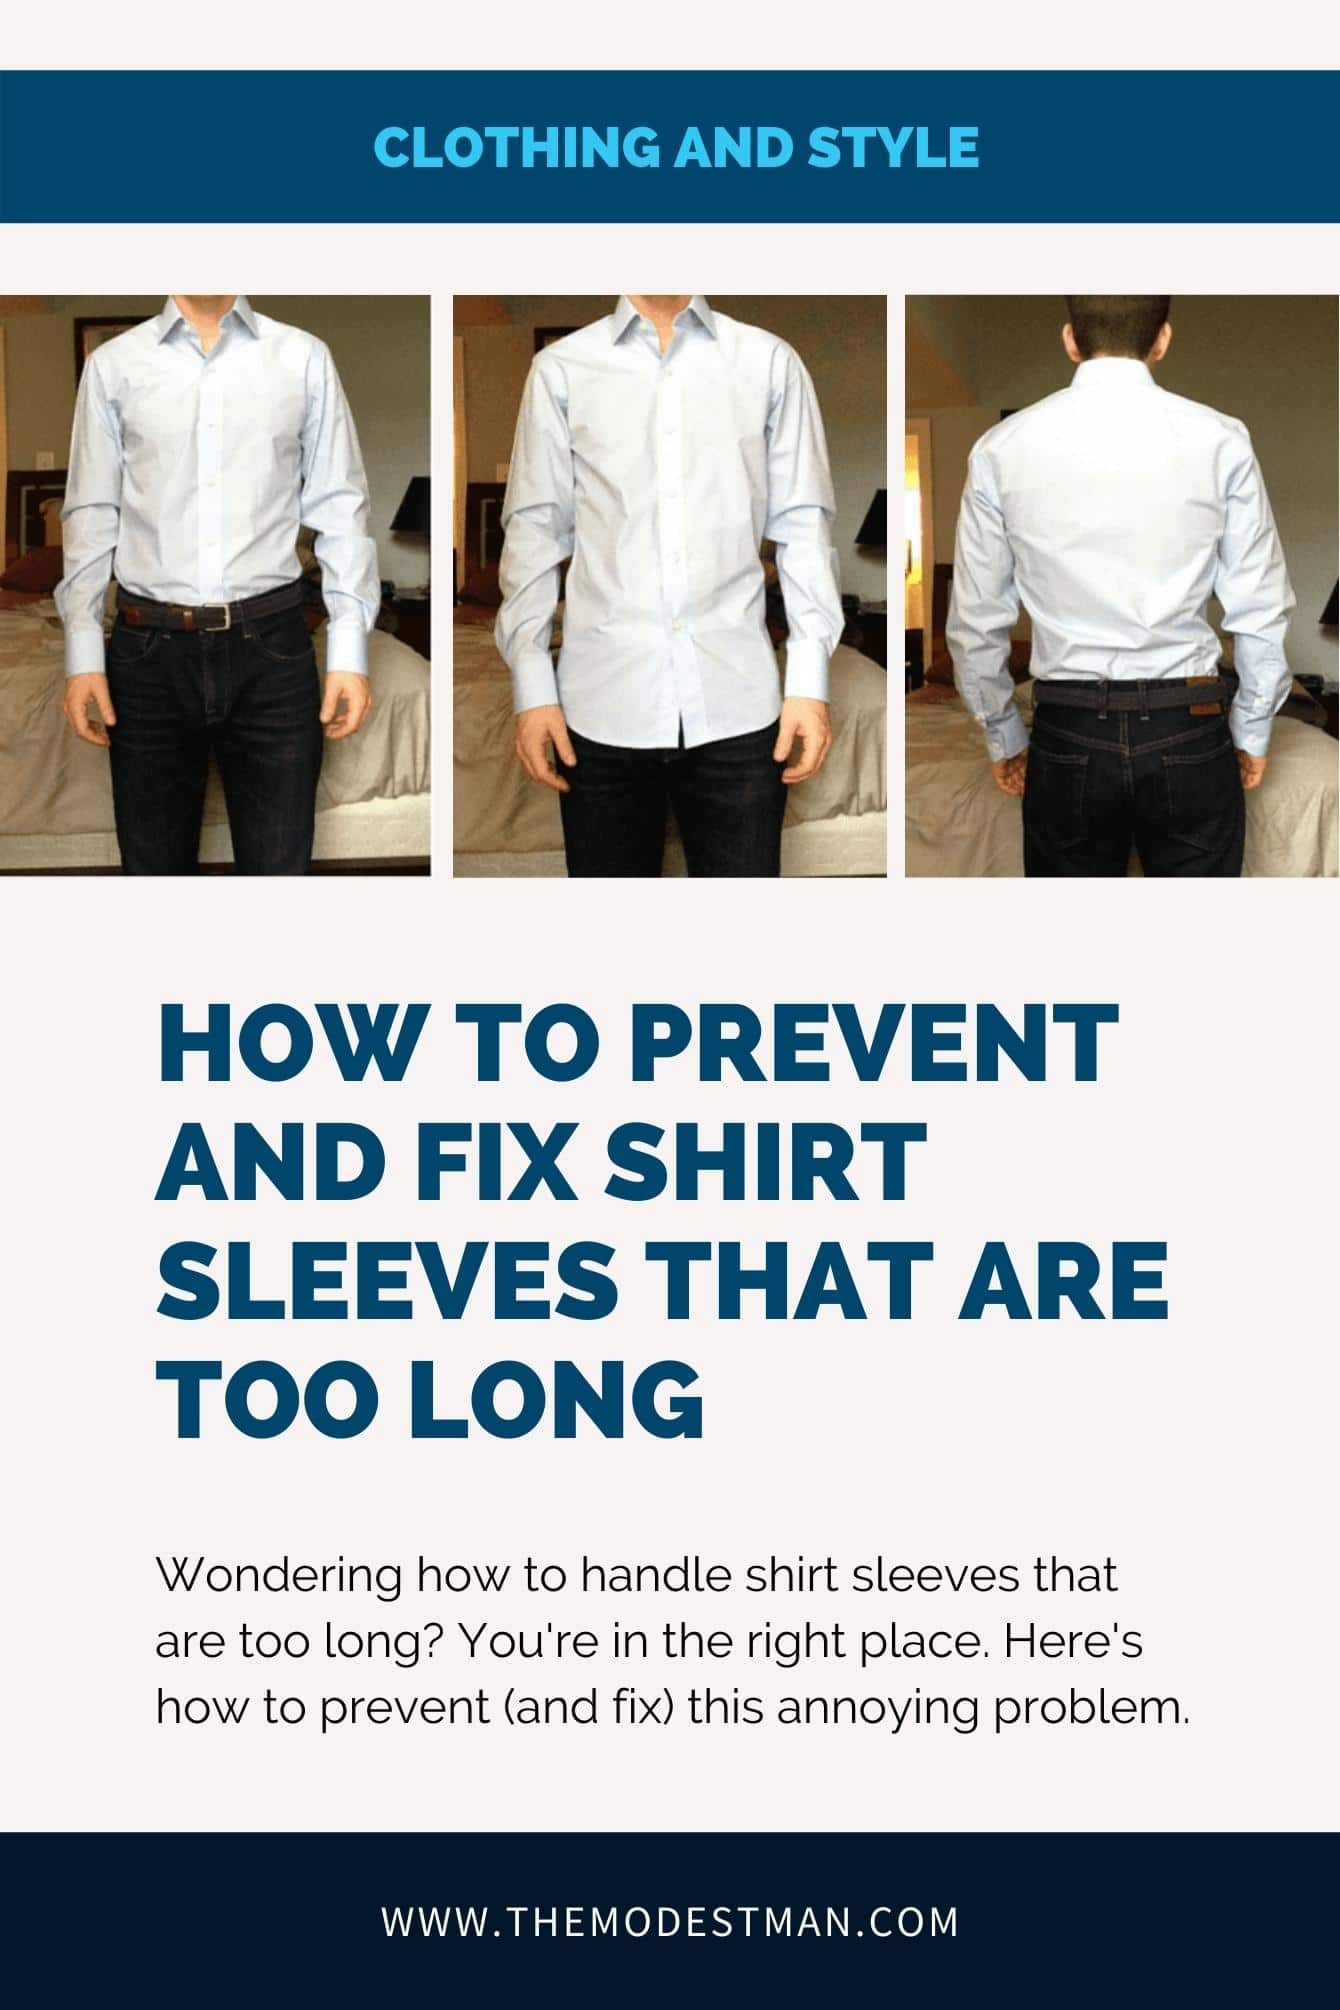 The Definitive Guide that You Never Wanted: Fitting and Adjusting